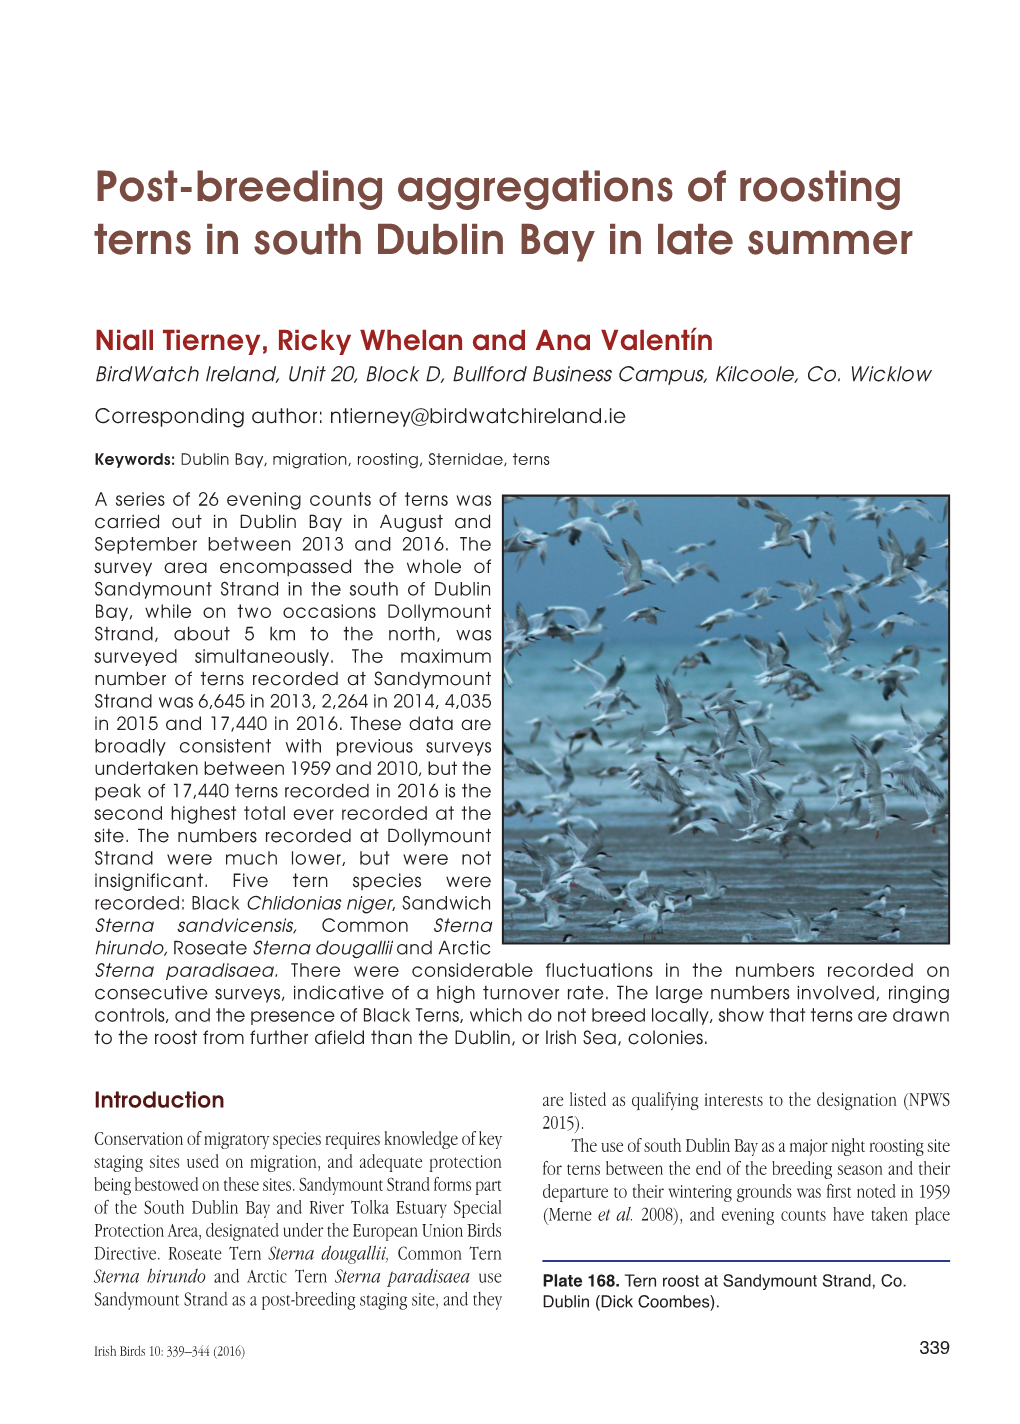 Post-Breeding Aggregations of Roosting Terns in South Dublin Bay in Late Summer